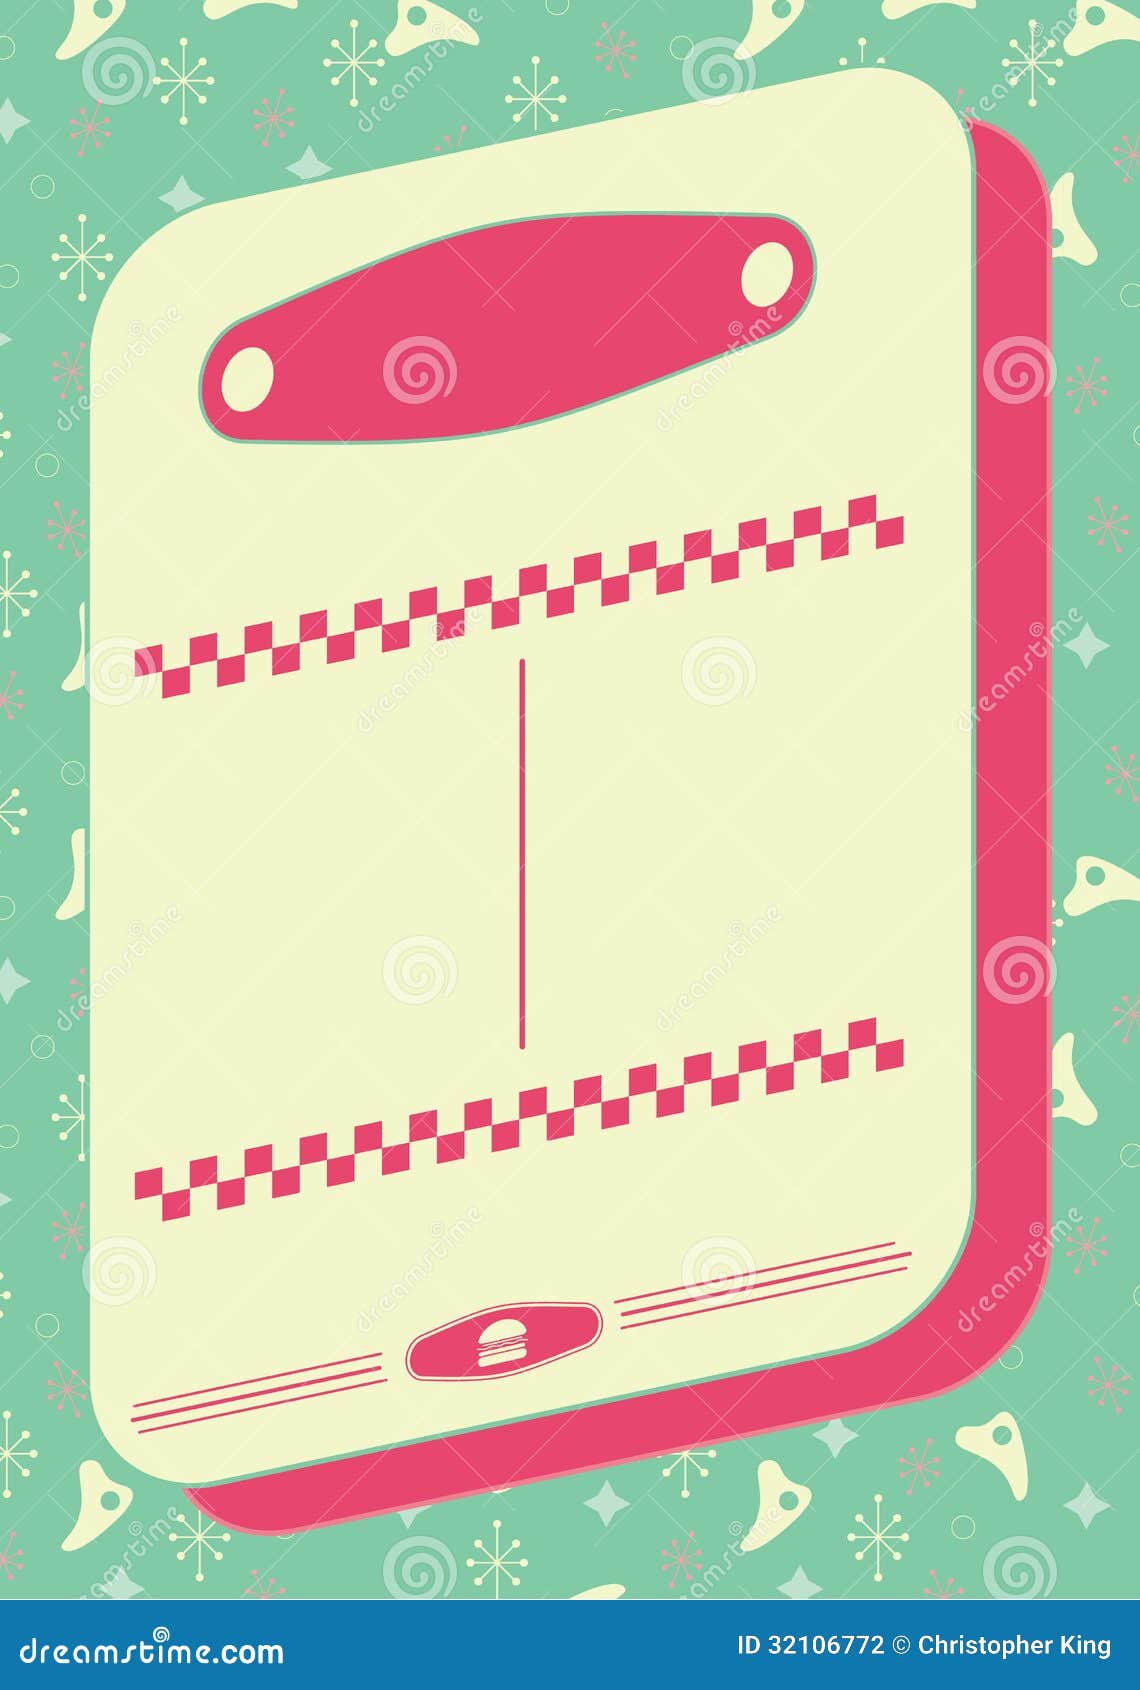 1950s diner style background and frame